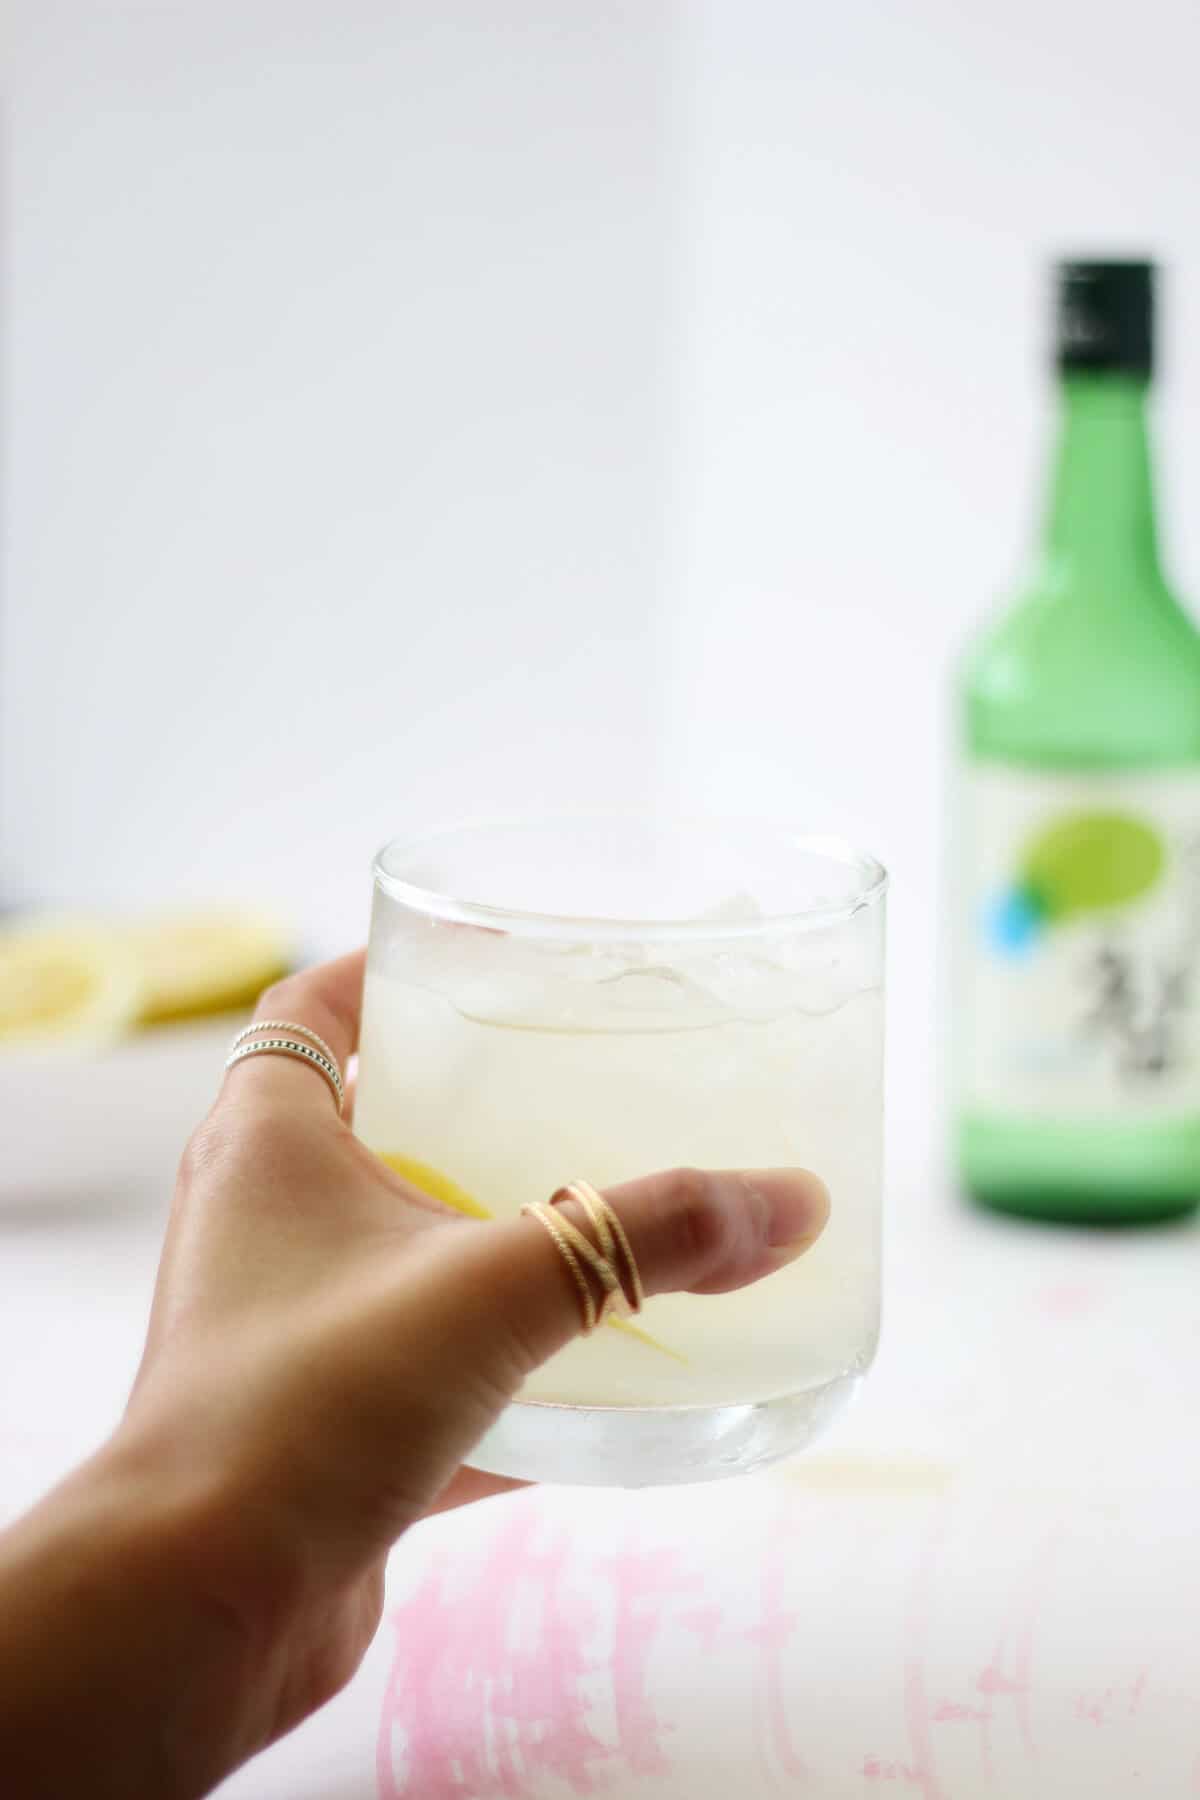 Hand with a thumb ring holding a clear glass filled with light yellow liquid. There's a bowl of lemons and a bottle of soju in the background.